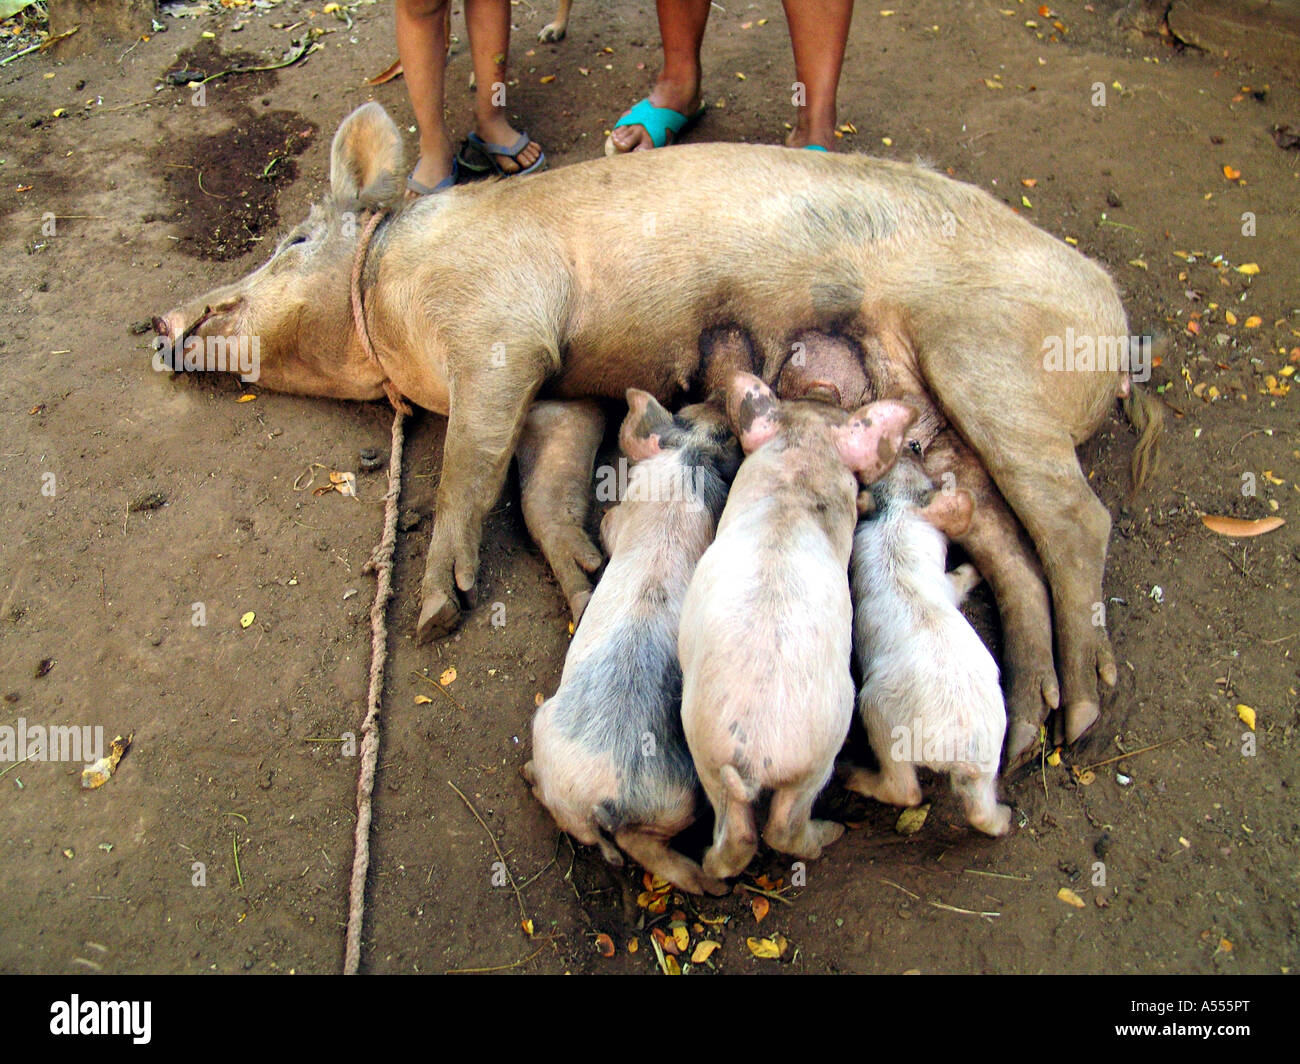 Painet ip2549 salvador piglets feeding mother pig san francsisco javier country developing nation less economically Stock Photo